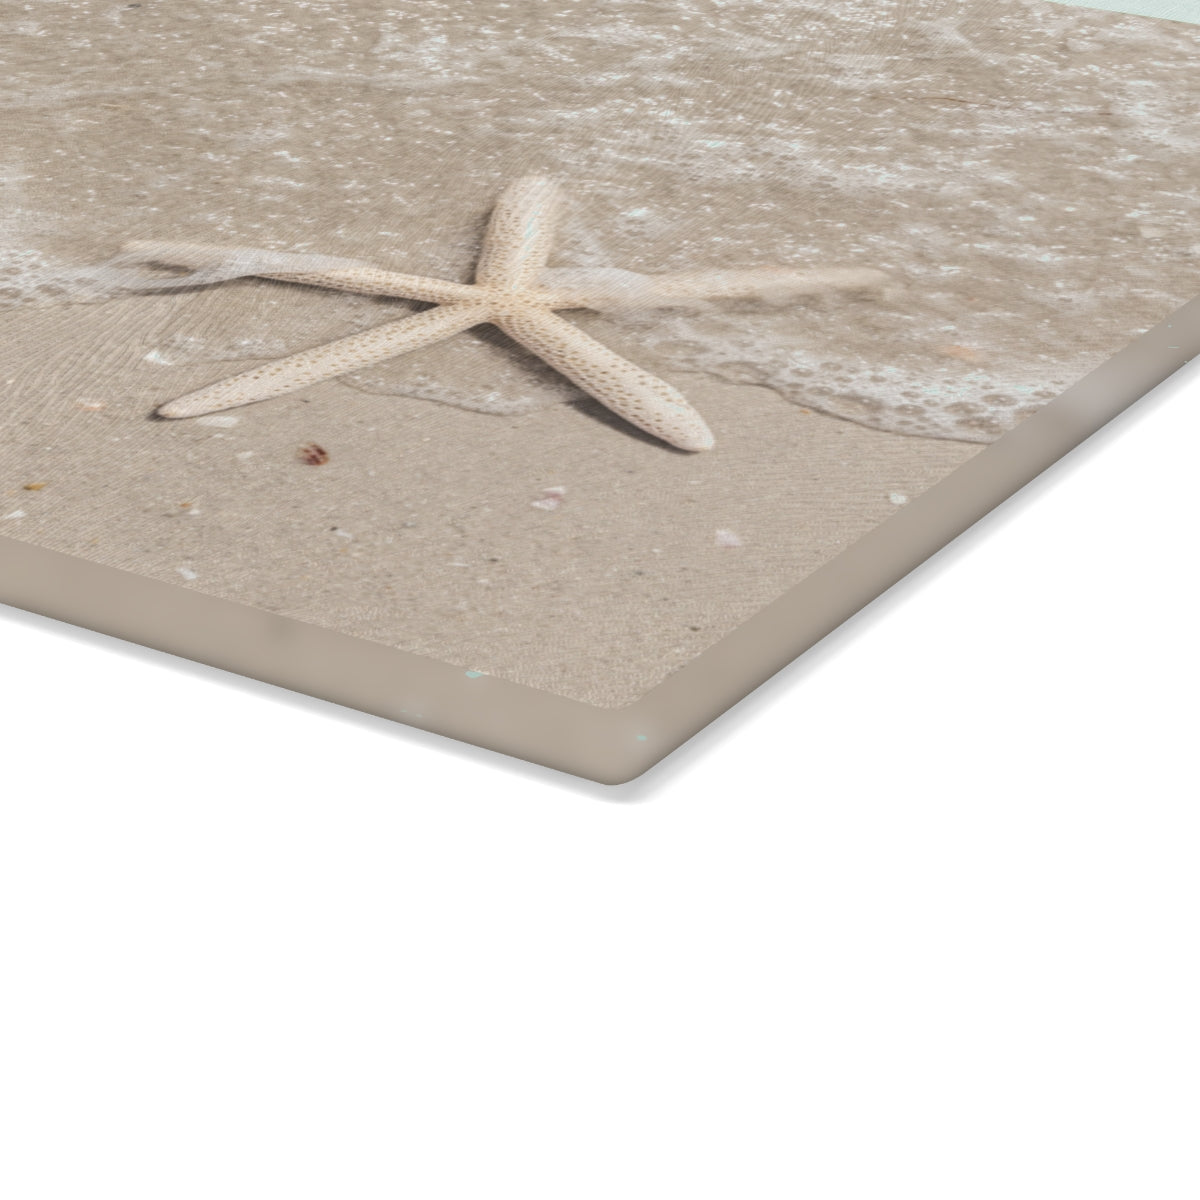 Glass Cutting Board, Sand and Starfish - Two Sizes Available1